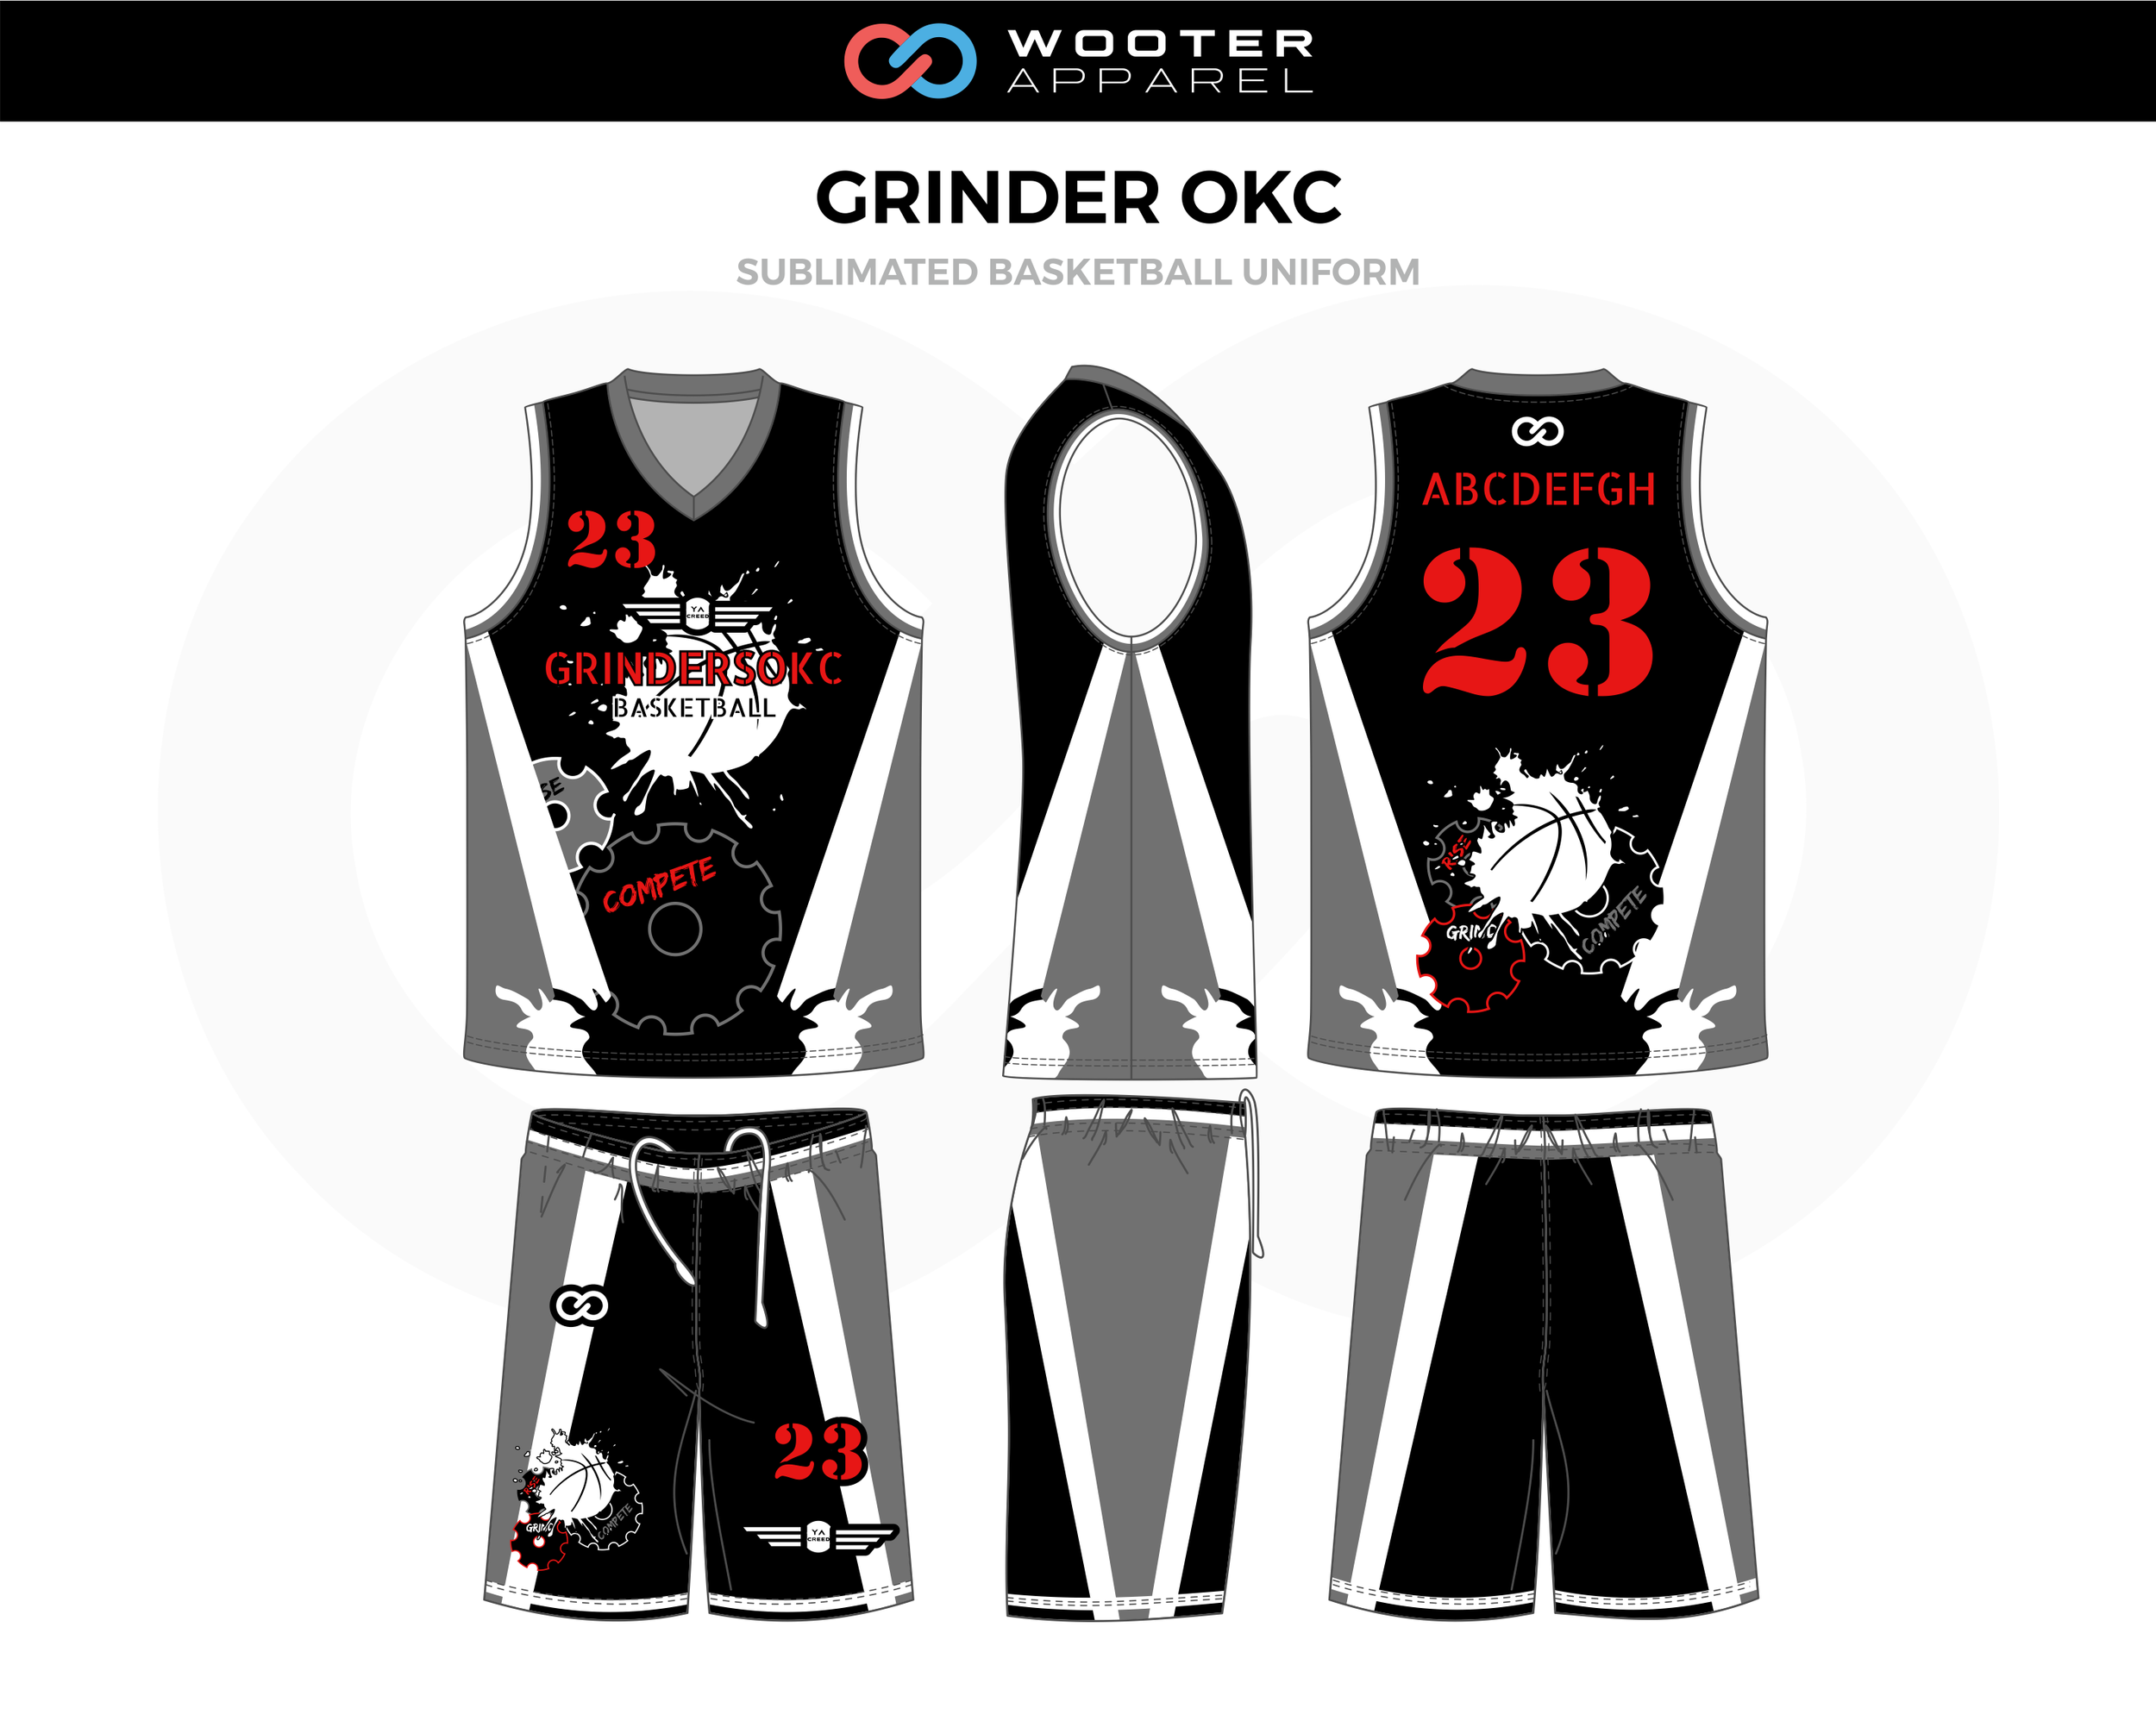 basketball jersey design gray and black